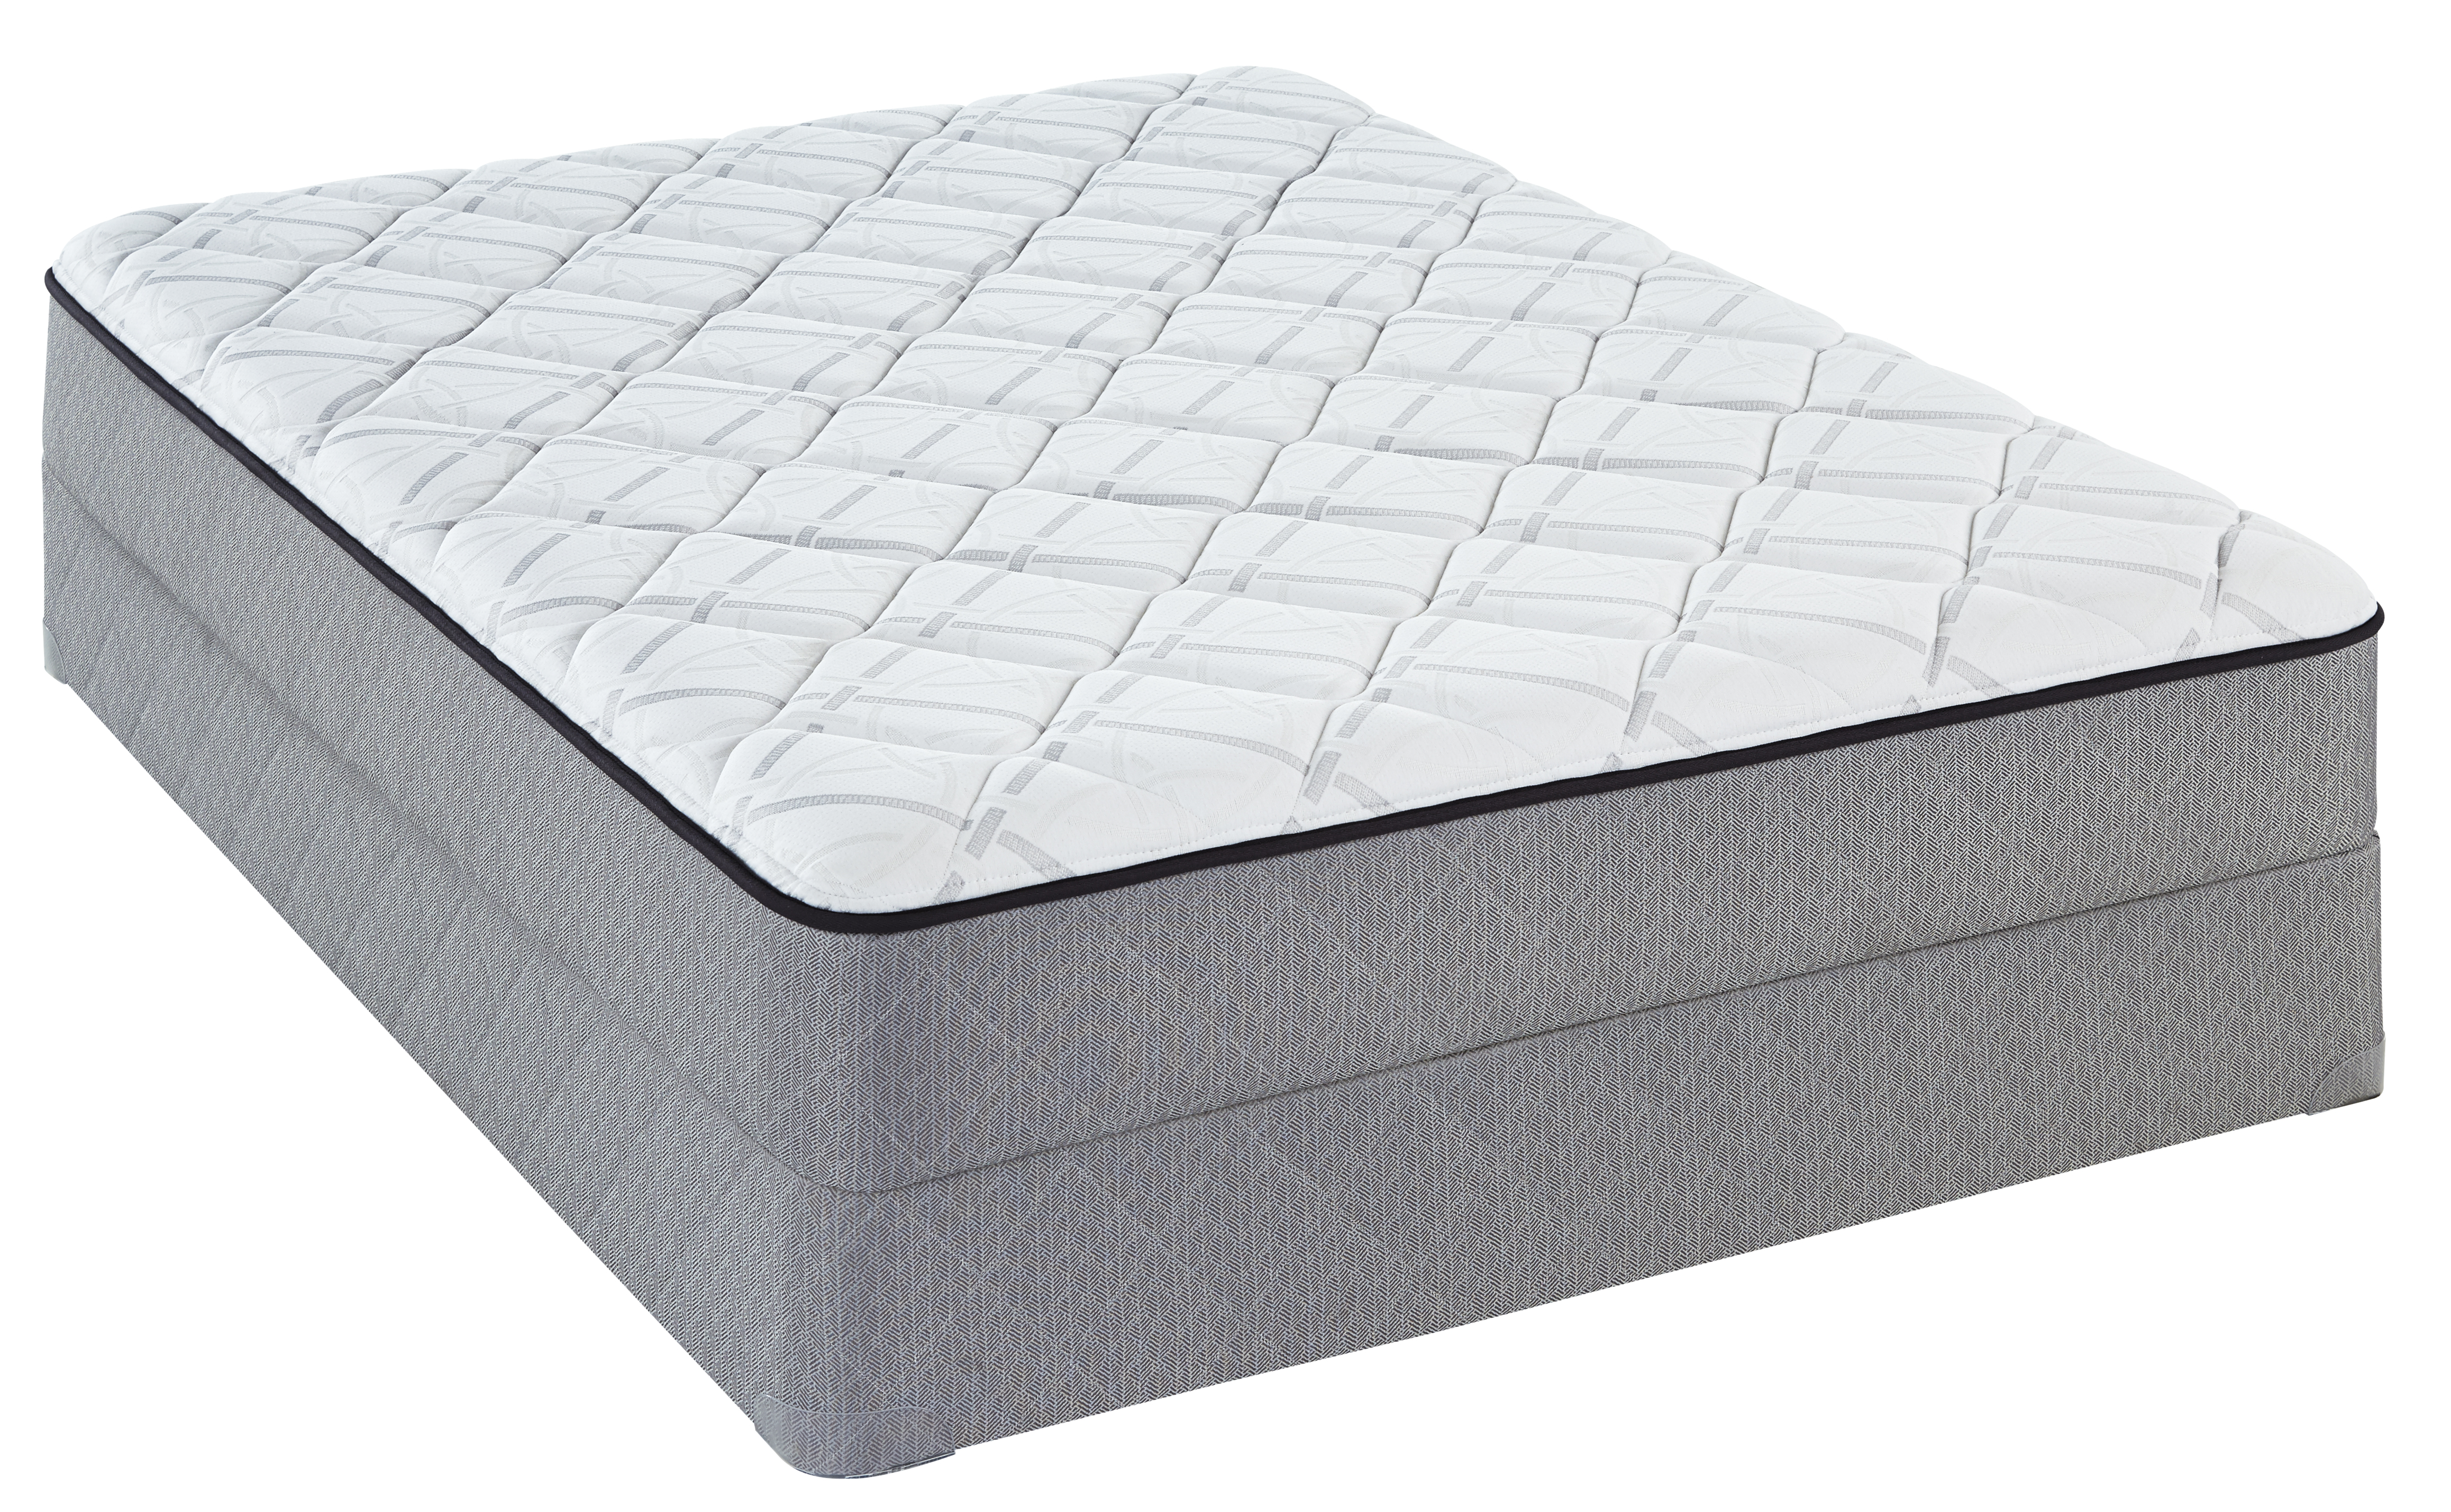 Sealy Jannings Firm White Full Mattress   Home   Mattresses   All